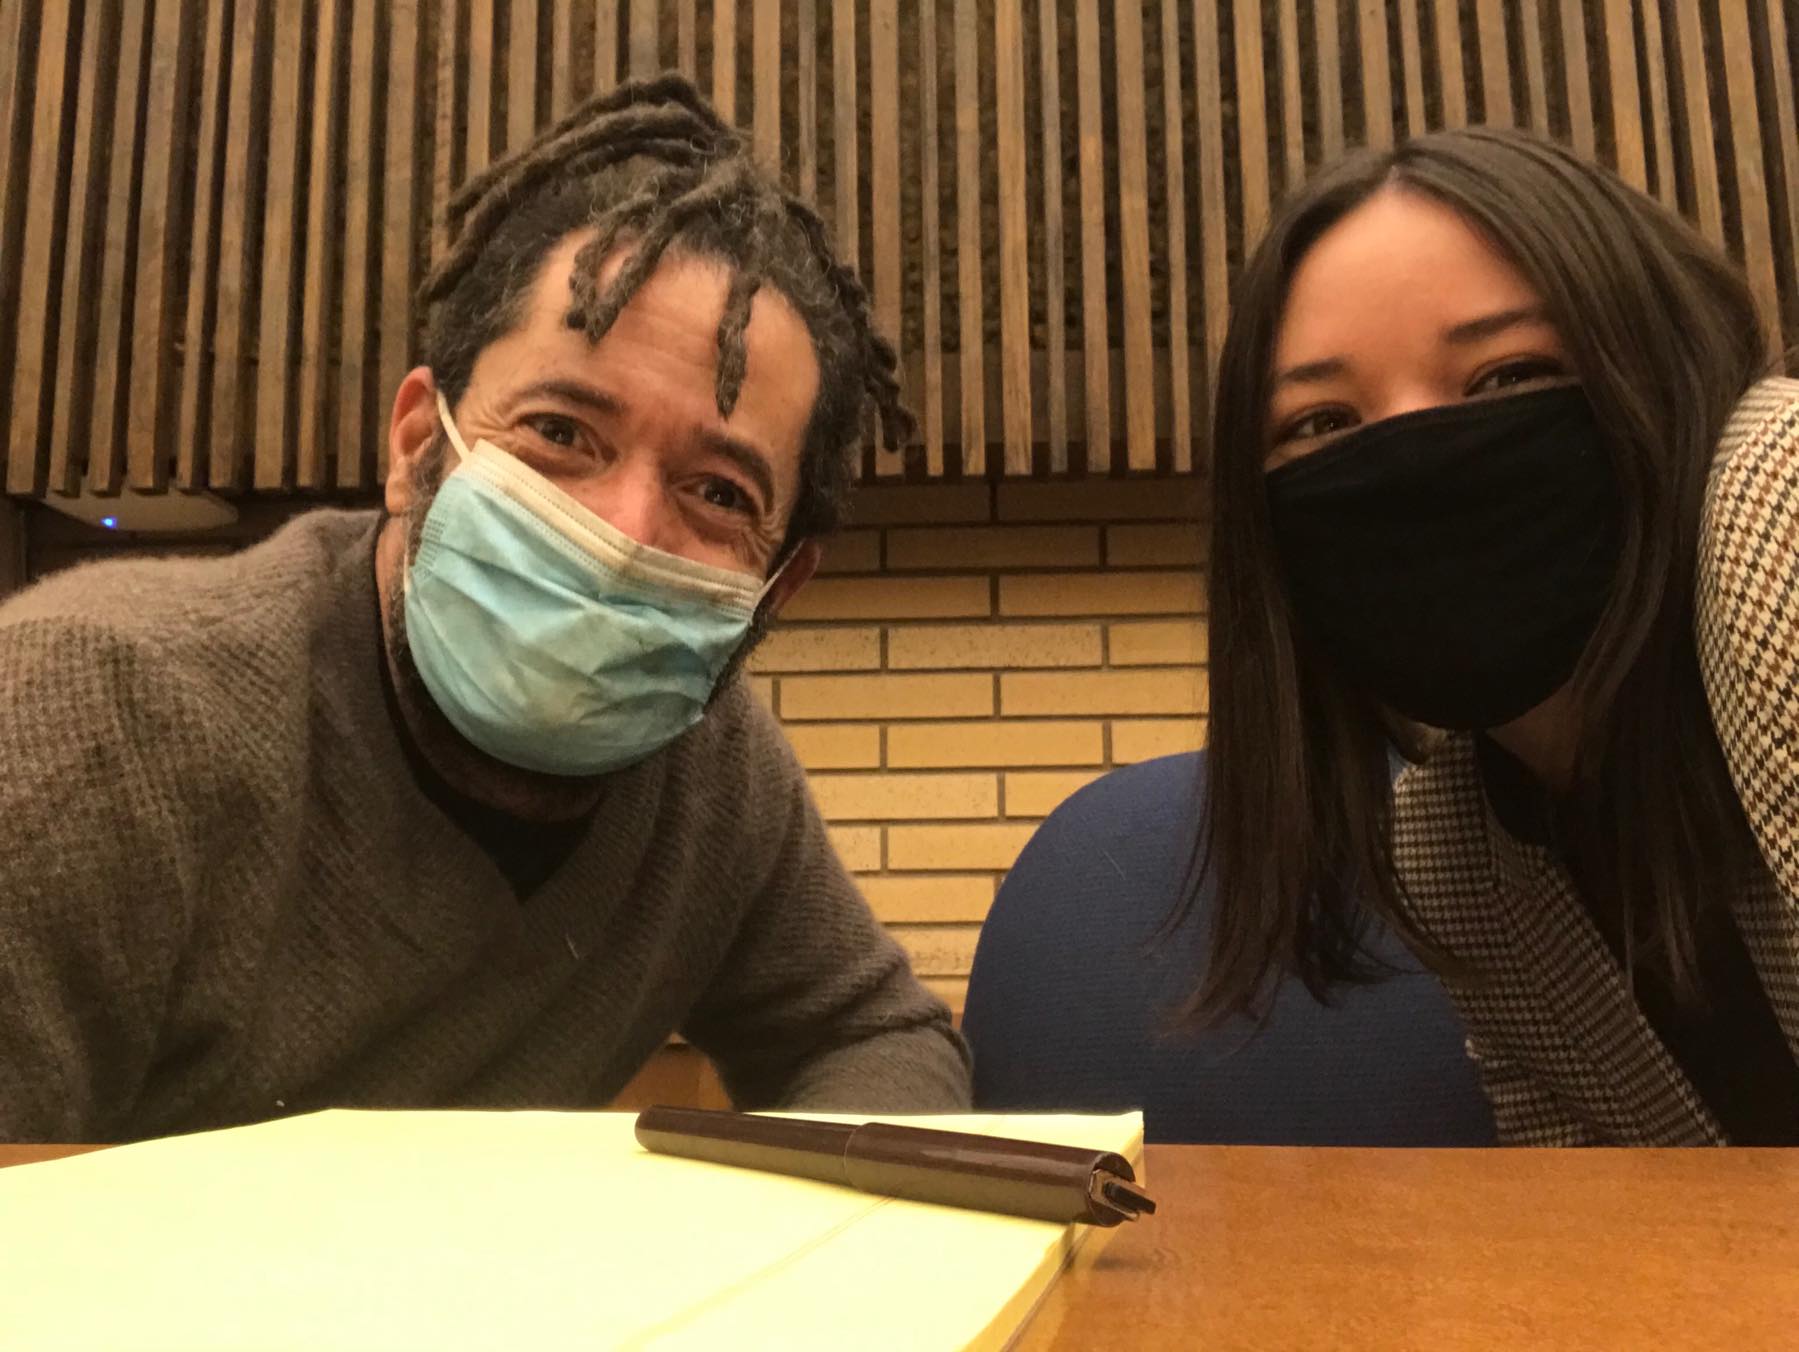 CLDC client Eric Jackson (l) with CLDC staff attorney Sarah Alvarez (r) sitting at a wooden tadle with a brick and wood wall in the background. Both are wearing surgical masks.